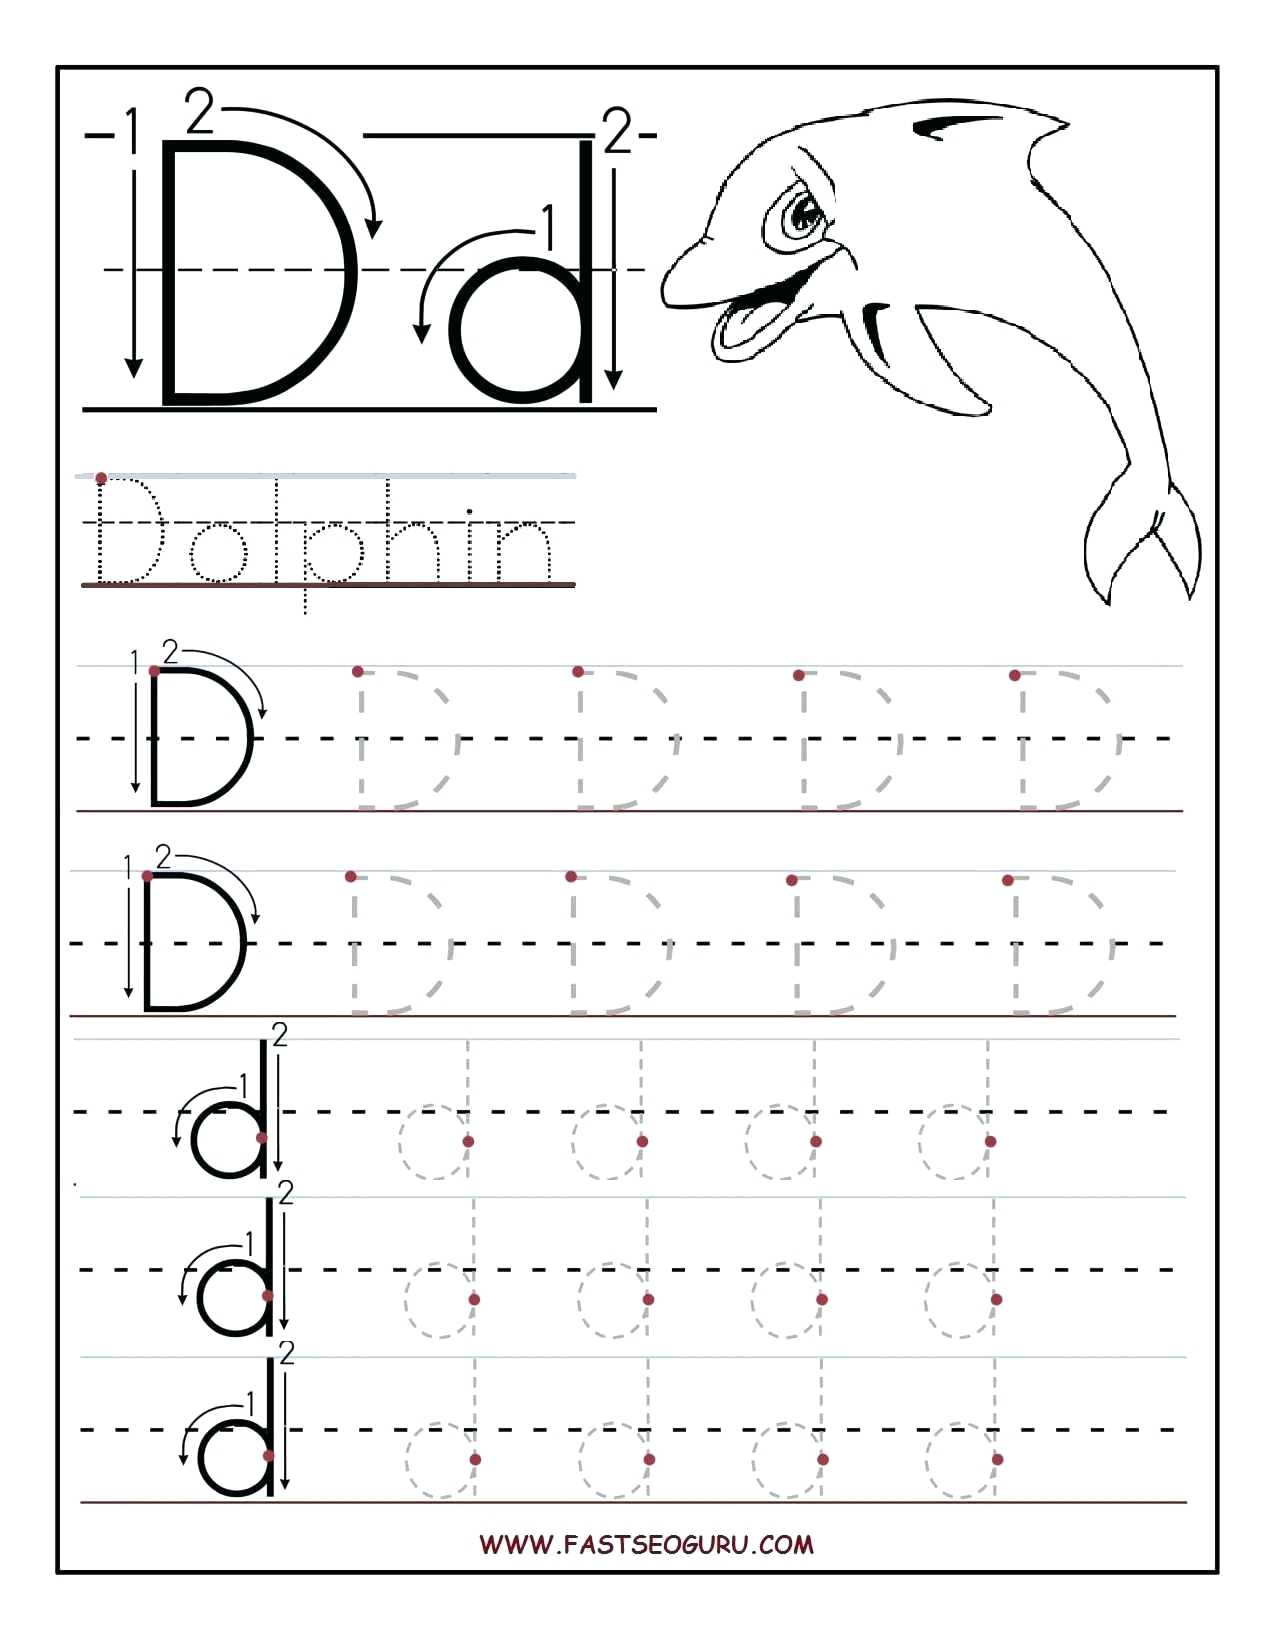 Abc Worksheets For 3 Year Olds | Printable Worksheets And with regard to Alphabet Worksheets 3 Year Olds